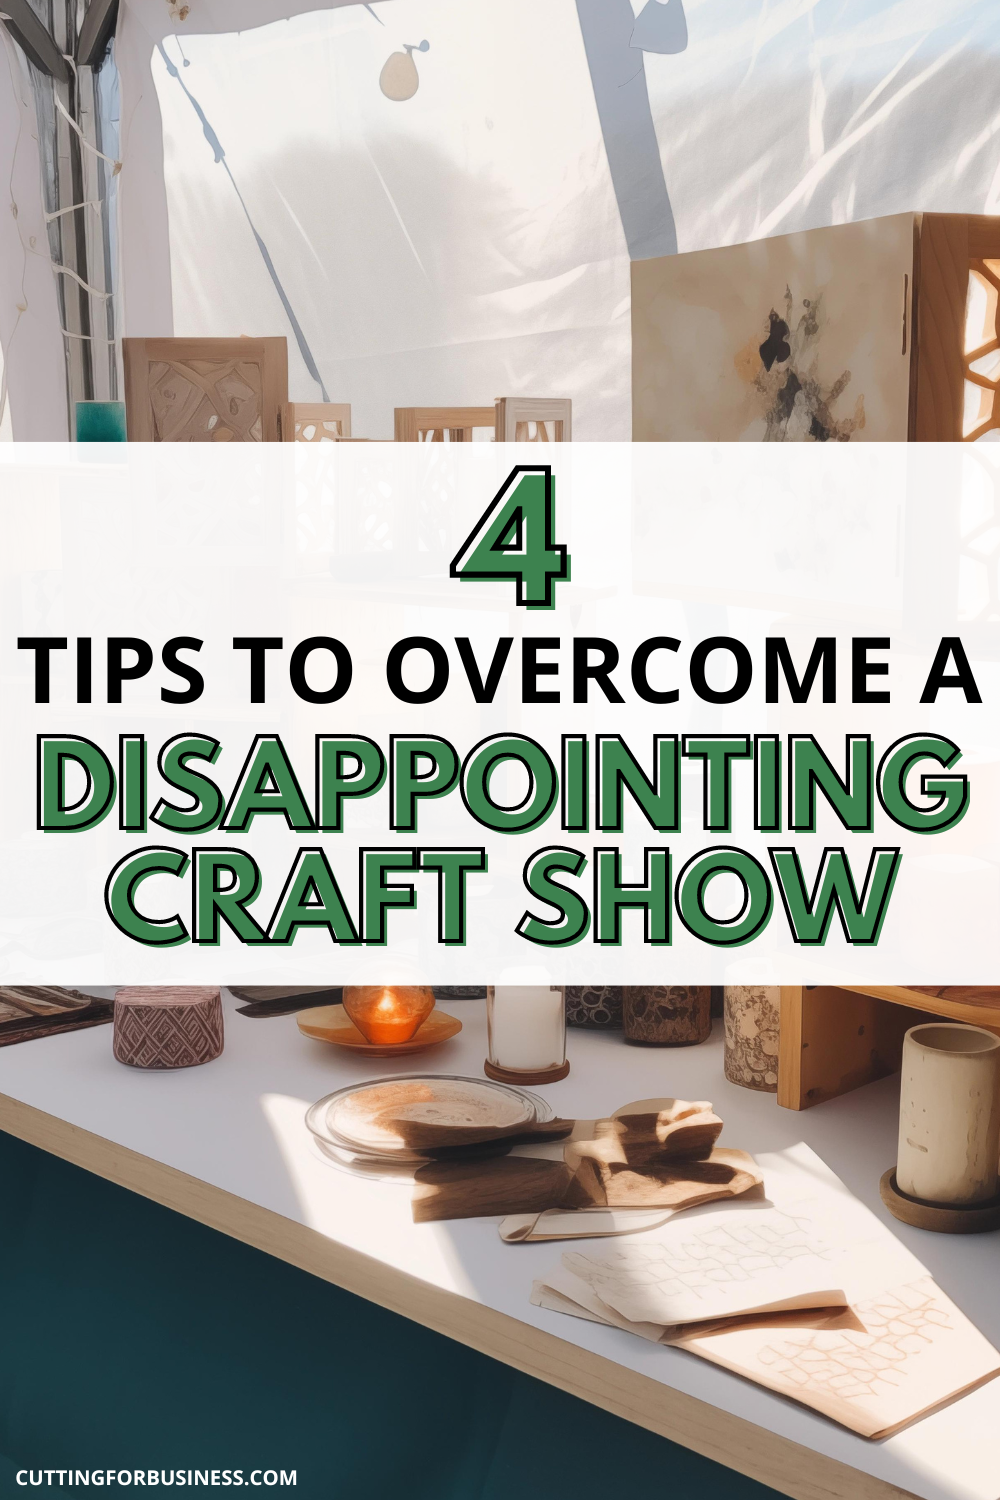 4 Tips to Overcome a Disappointing Craft Show - cuttingforbusiness.com